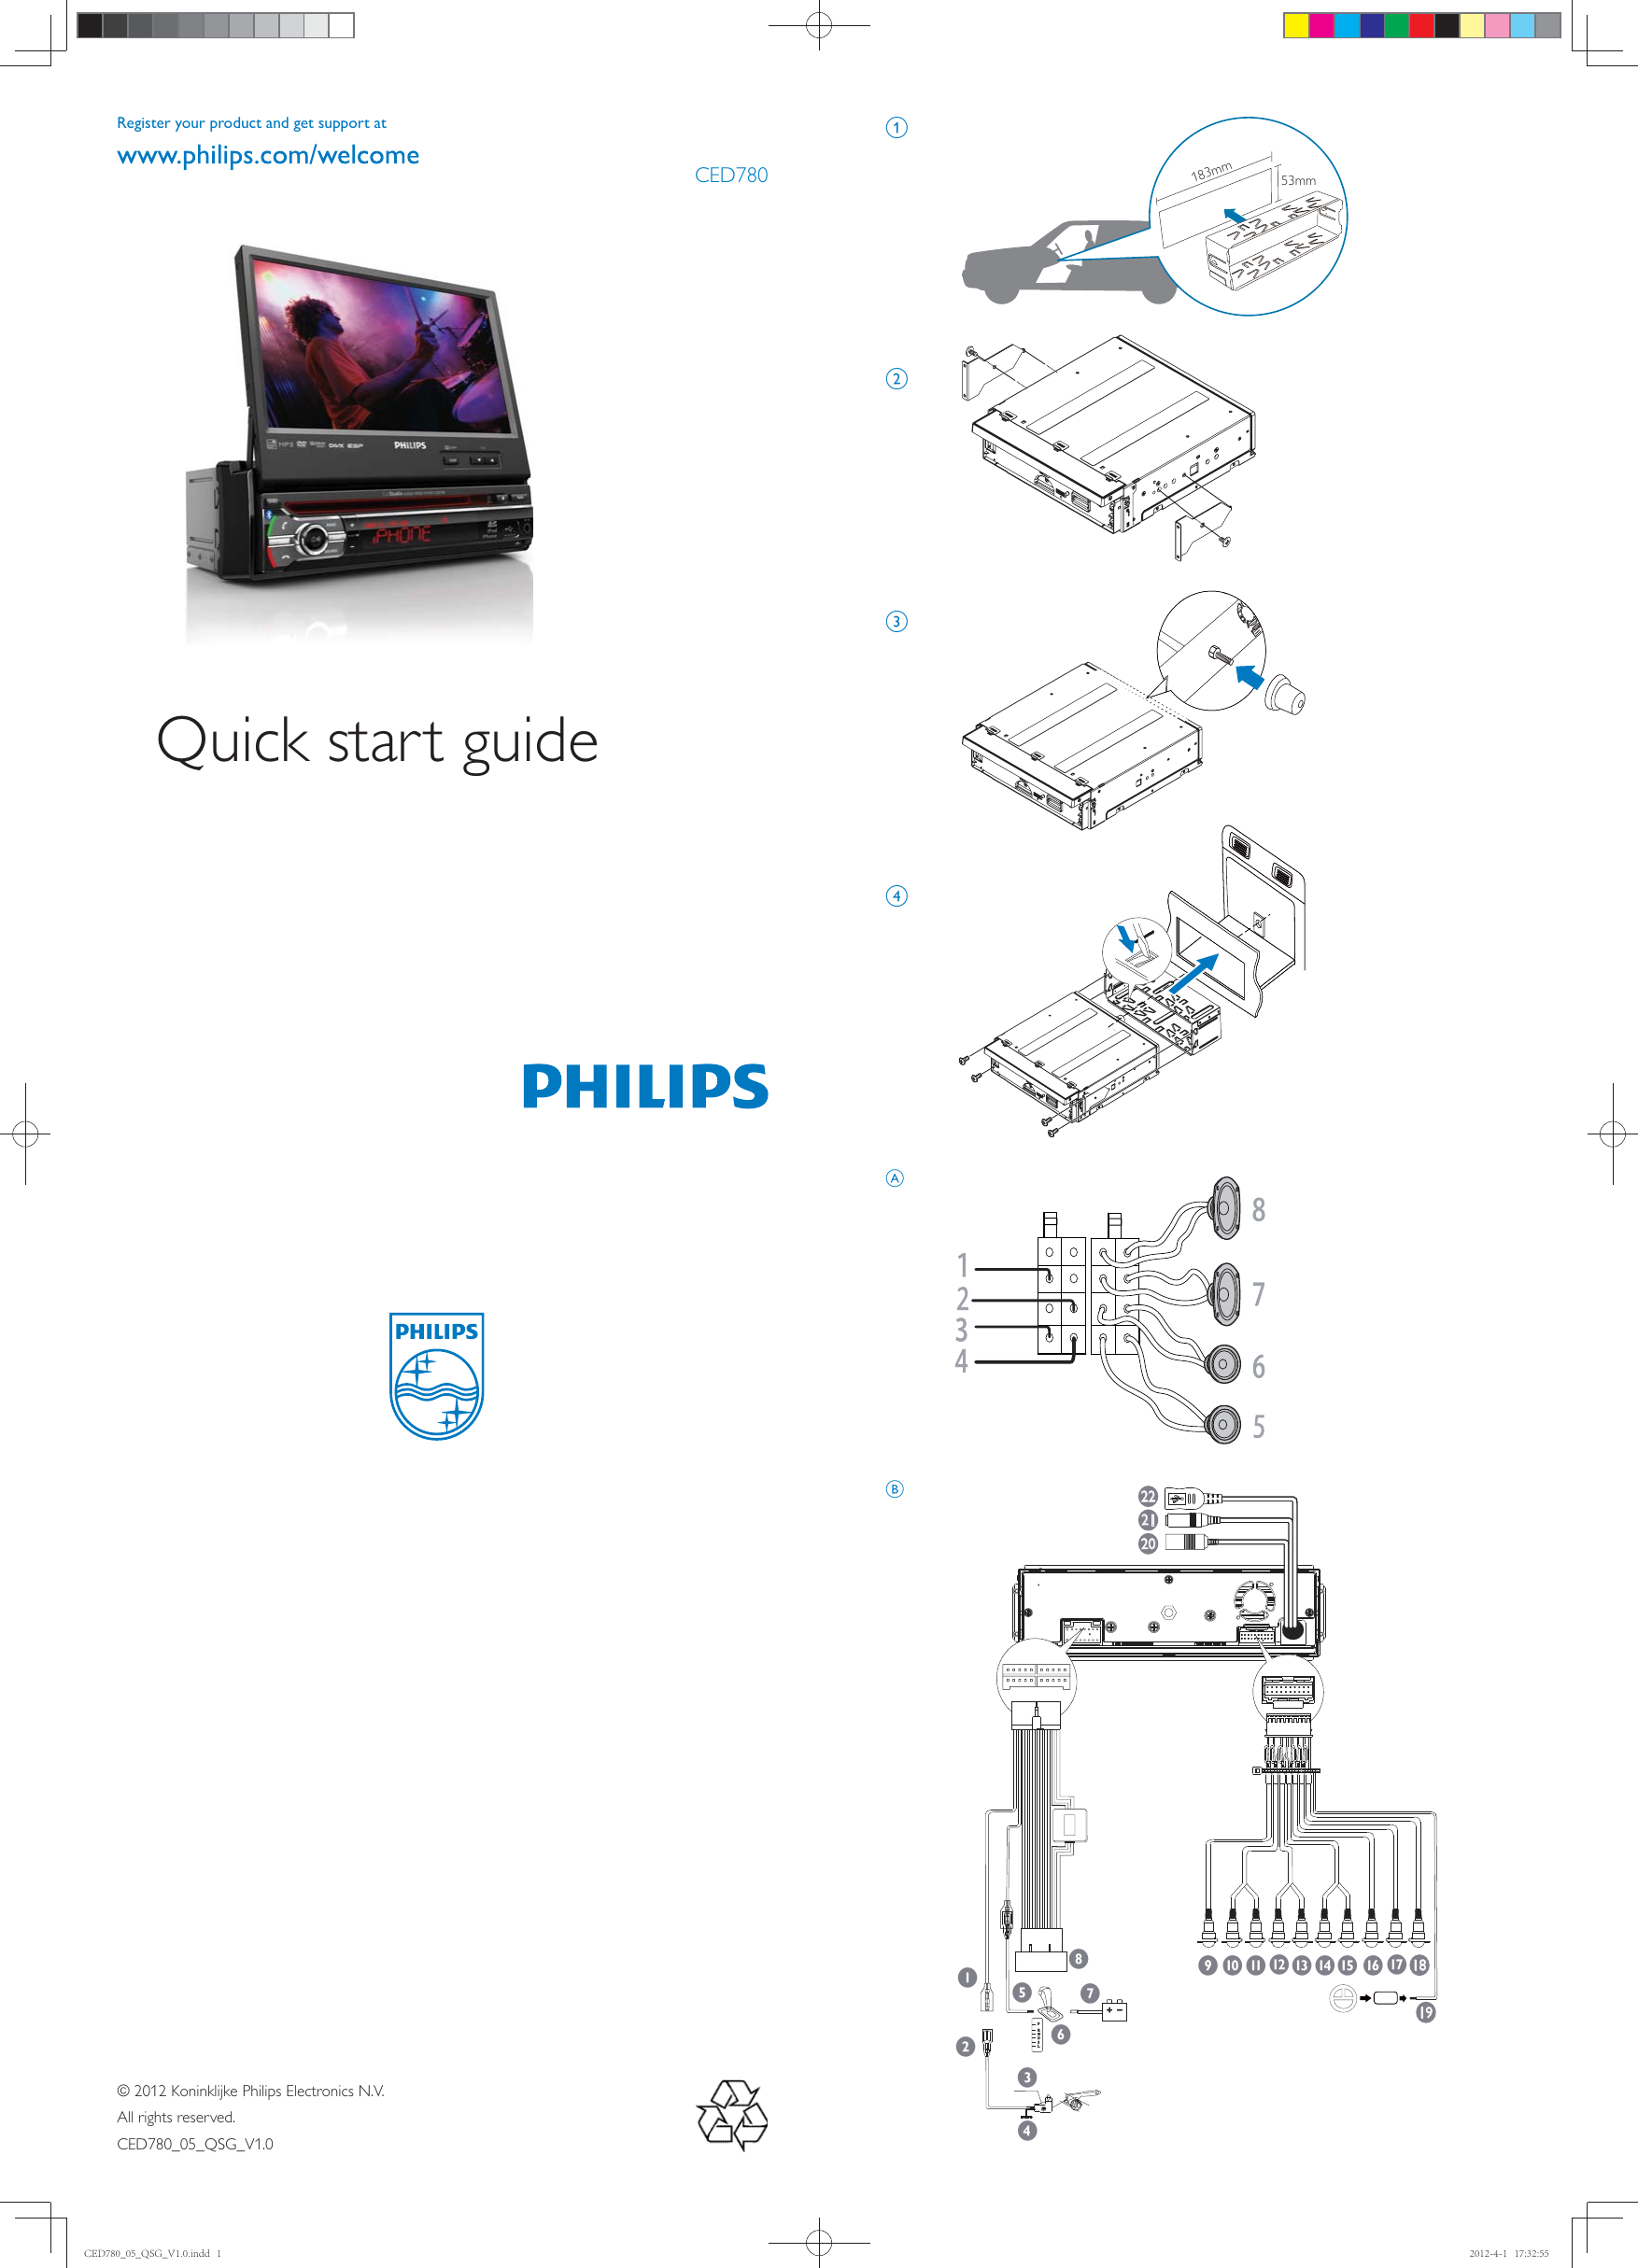 Page 1 of 2 - Philips CED780/05 CED780_05_QSG_V1.0 User Manual Quick Start Guide Ced780 05 Qsg Aen